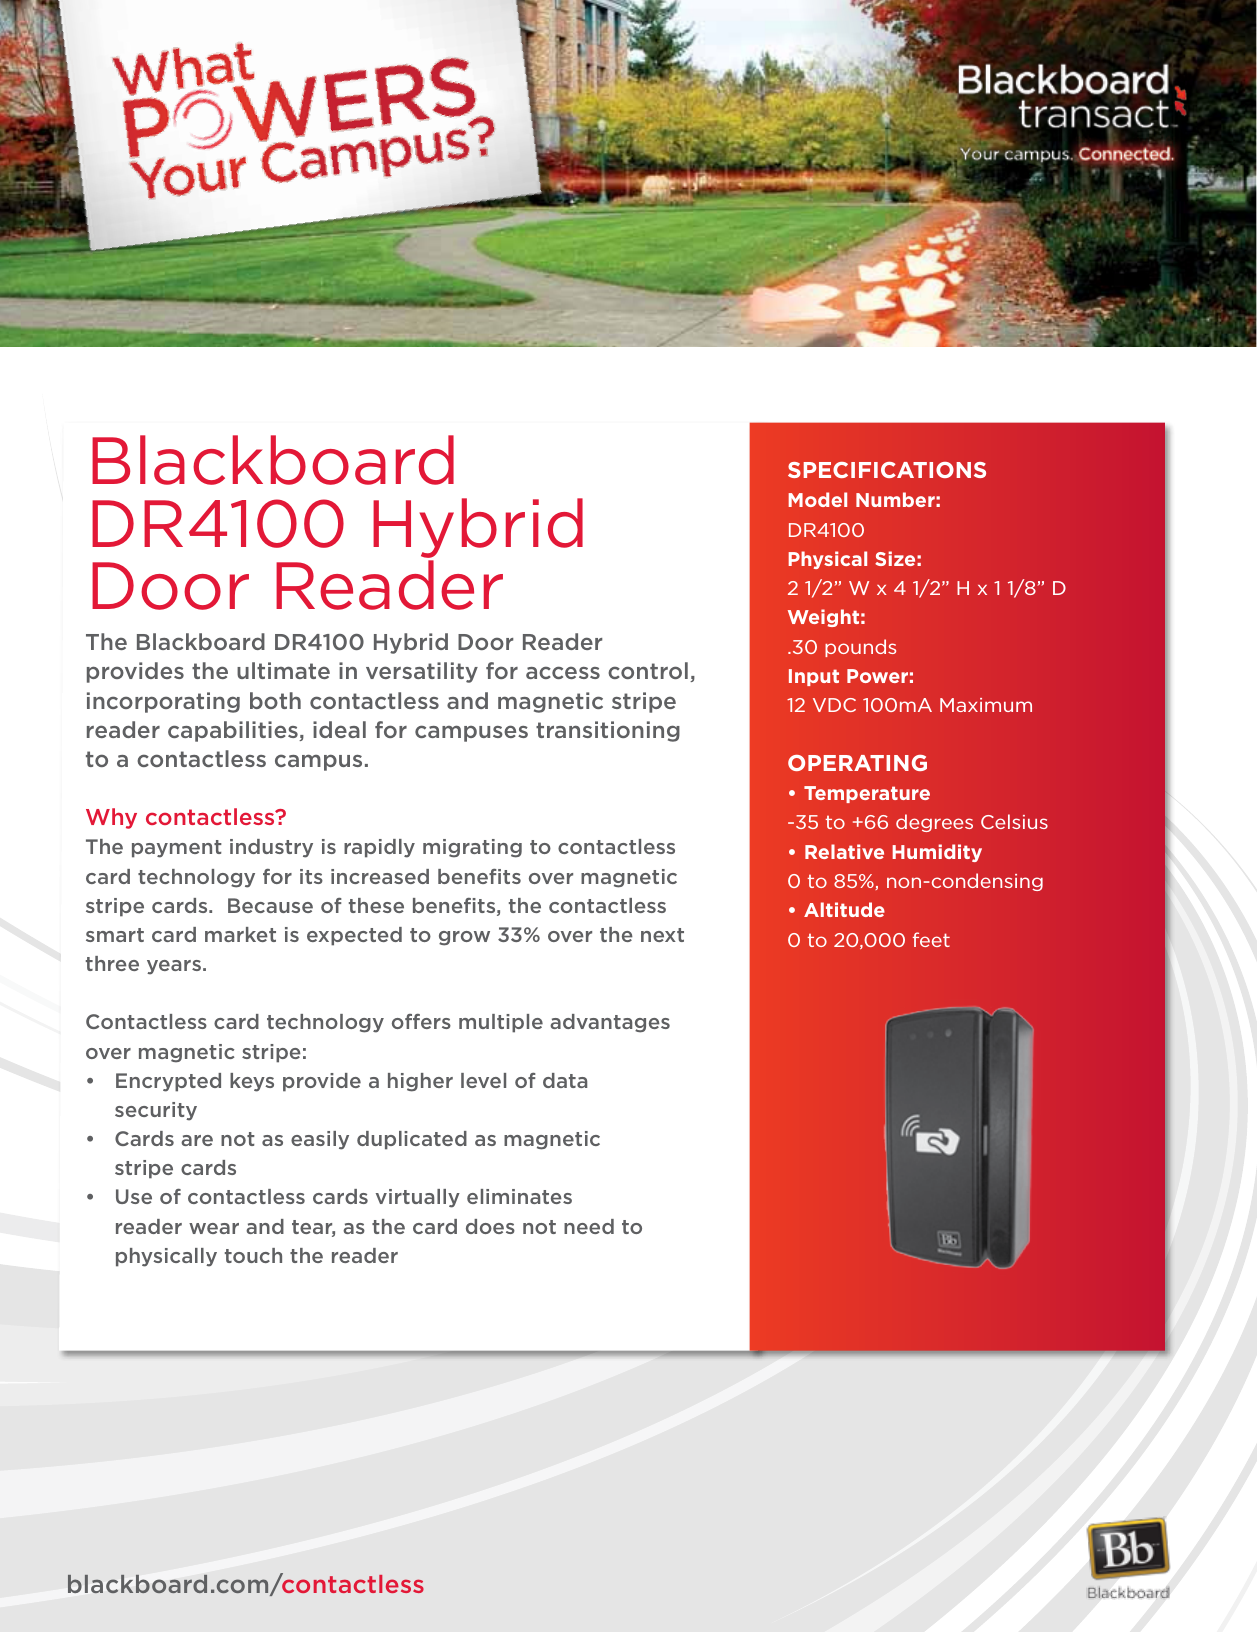 The Blackboard DR4100 Hybrid Door Reader provides the ultimate in versatility for access control, incorporating both contactless and magnetic stripe reader capabilities, ideal for campuses transitioning to a contactless campus.Why contactless?The payment industry is rapidly migrating to contactless card technology for its increased beneﬁts over magnetic stripe cards.  Because of these beneﬁts, the contactless smart card market is expected to grow 33% over the next three years.Contactless card technology offers multiple advantages over magnetic stripe:• Encryptedkeysprovideahigherlevelofdata  security• Cardsarenotaseasilyduplicatedasmagnetic   stripe cards• Useofcontactlesscardsvirtuallyeliminates    reader wear and tear, as the card does not need to      physically touch the readerBlackboard DR4100 Hybrid Door Reader SPECIFICATIONSModel Number:DR4100Physical Size: 2 1/2” W x 4 1/2” H x 1 1/8” DWeight: .30 poundsInput Power:12 VDC 100mA MaximumOPERATING•Temperature-35 to +66 degrees Celsius•RelativeHumidity0 to 85%, non-condensing•Altitude0 to 20,000 feet             blackboard.com/contactless